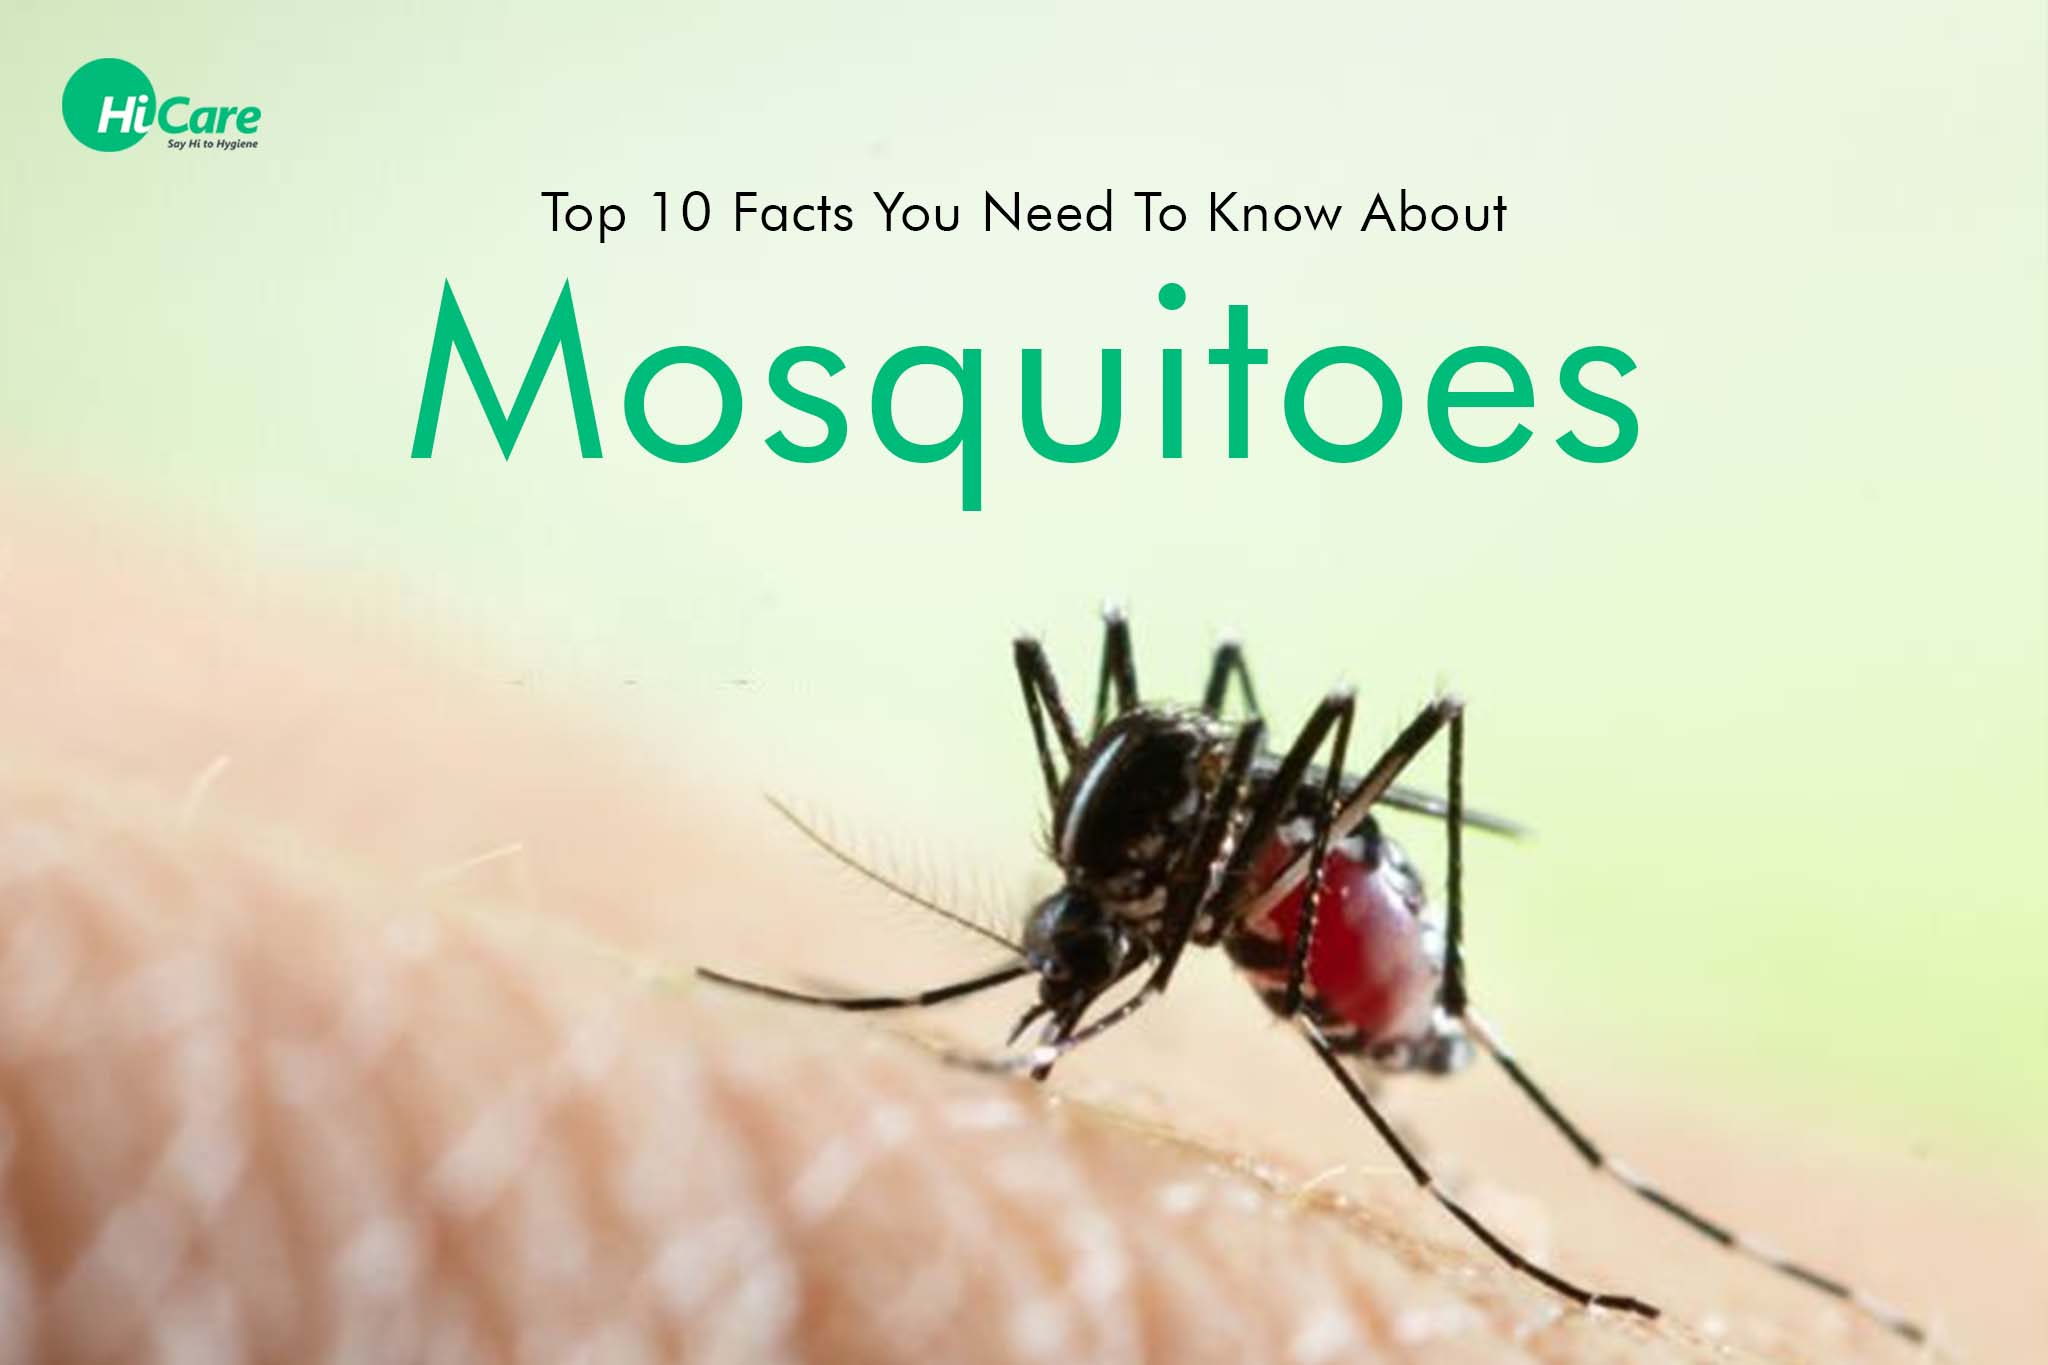 facts about mosquitoes you need to know